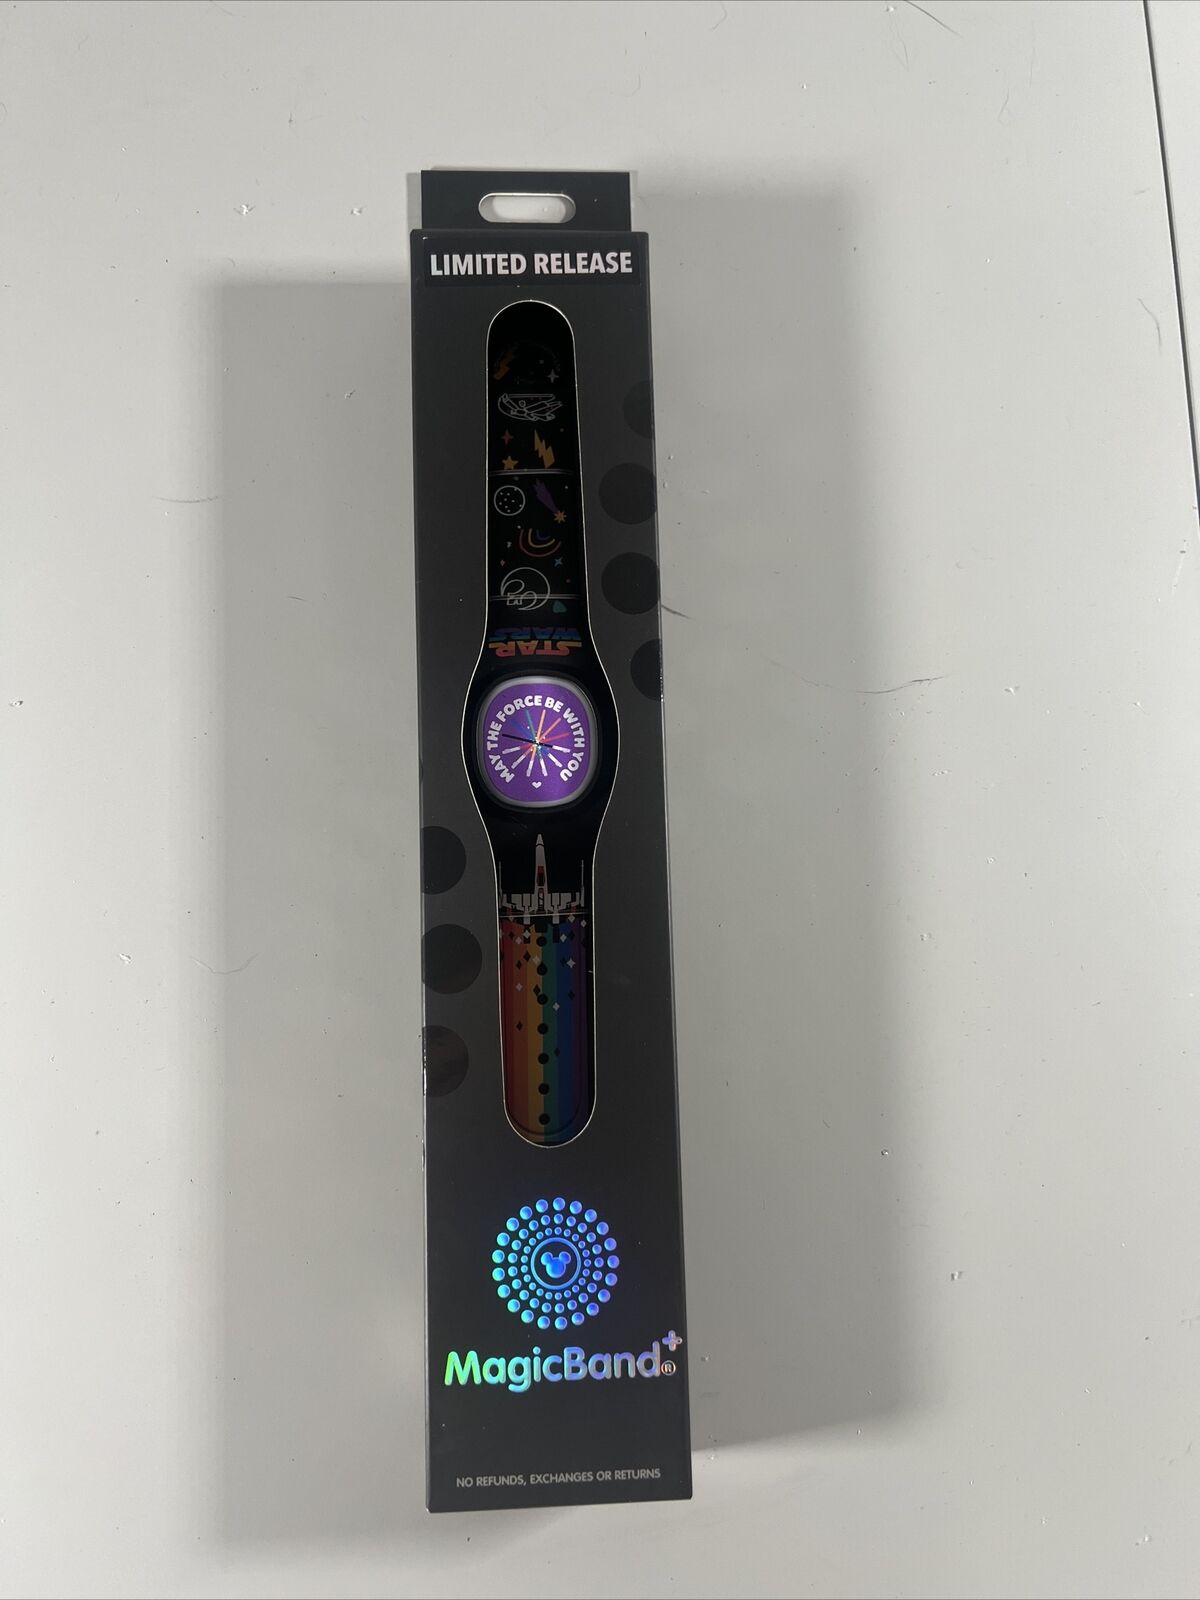 Disney Star Wars Pride May The Force Be With You Magicband + Limited Release